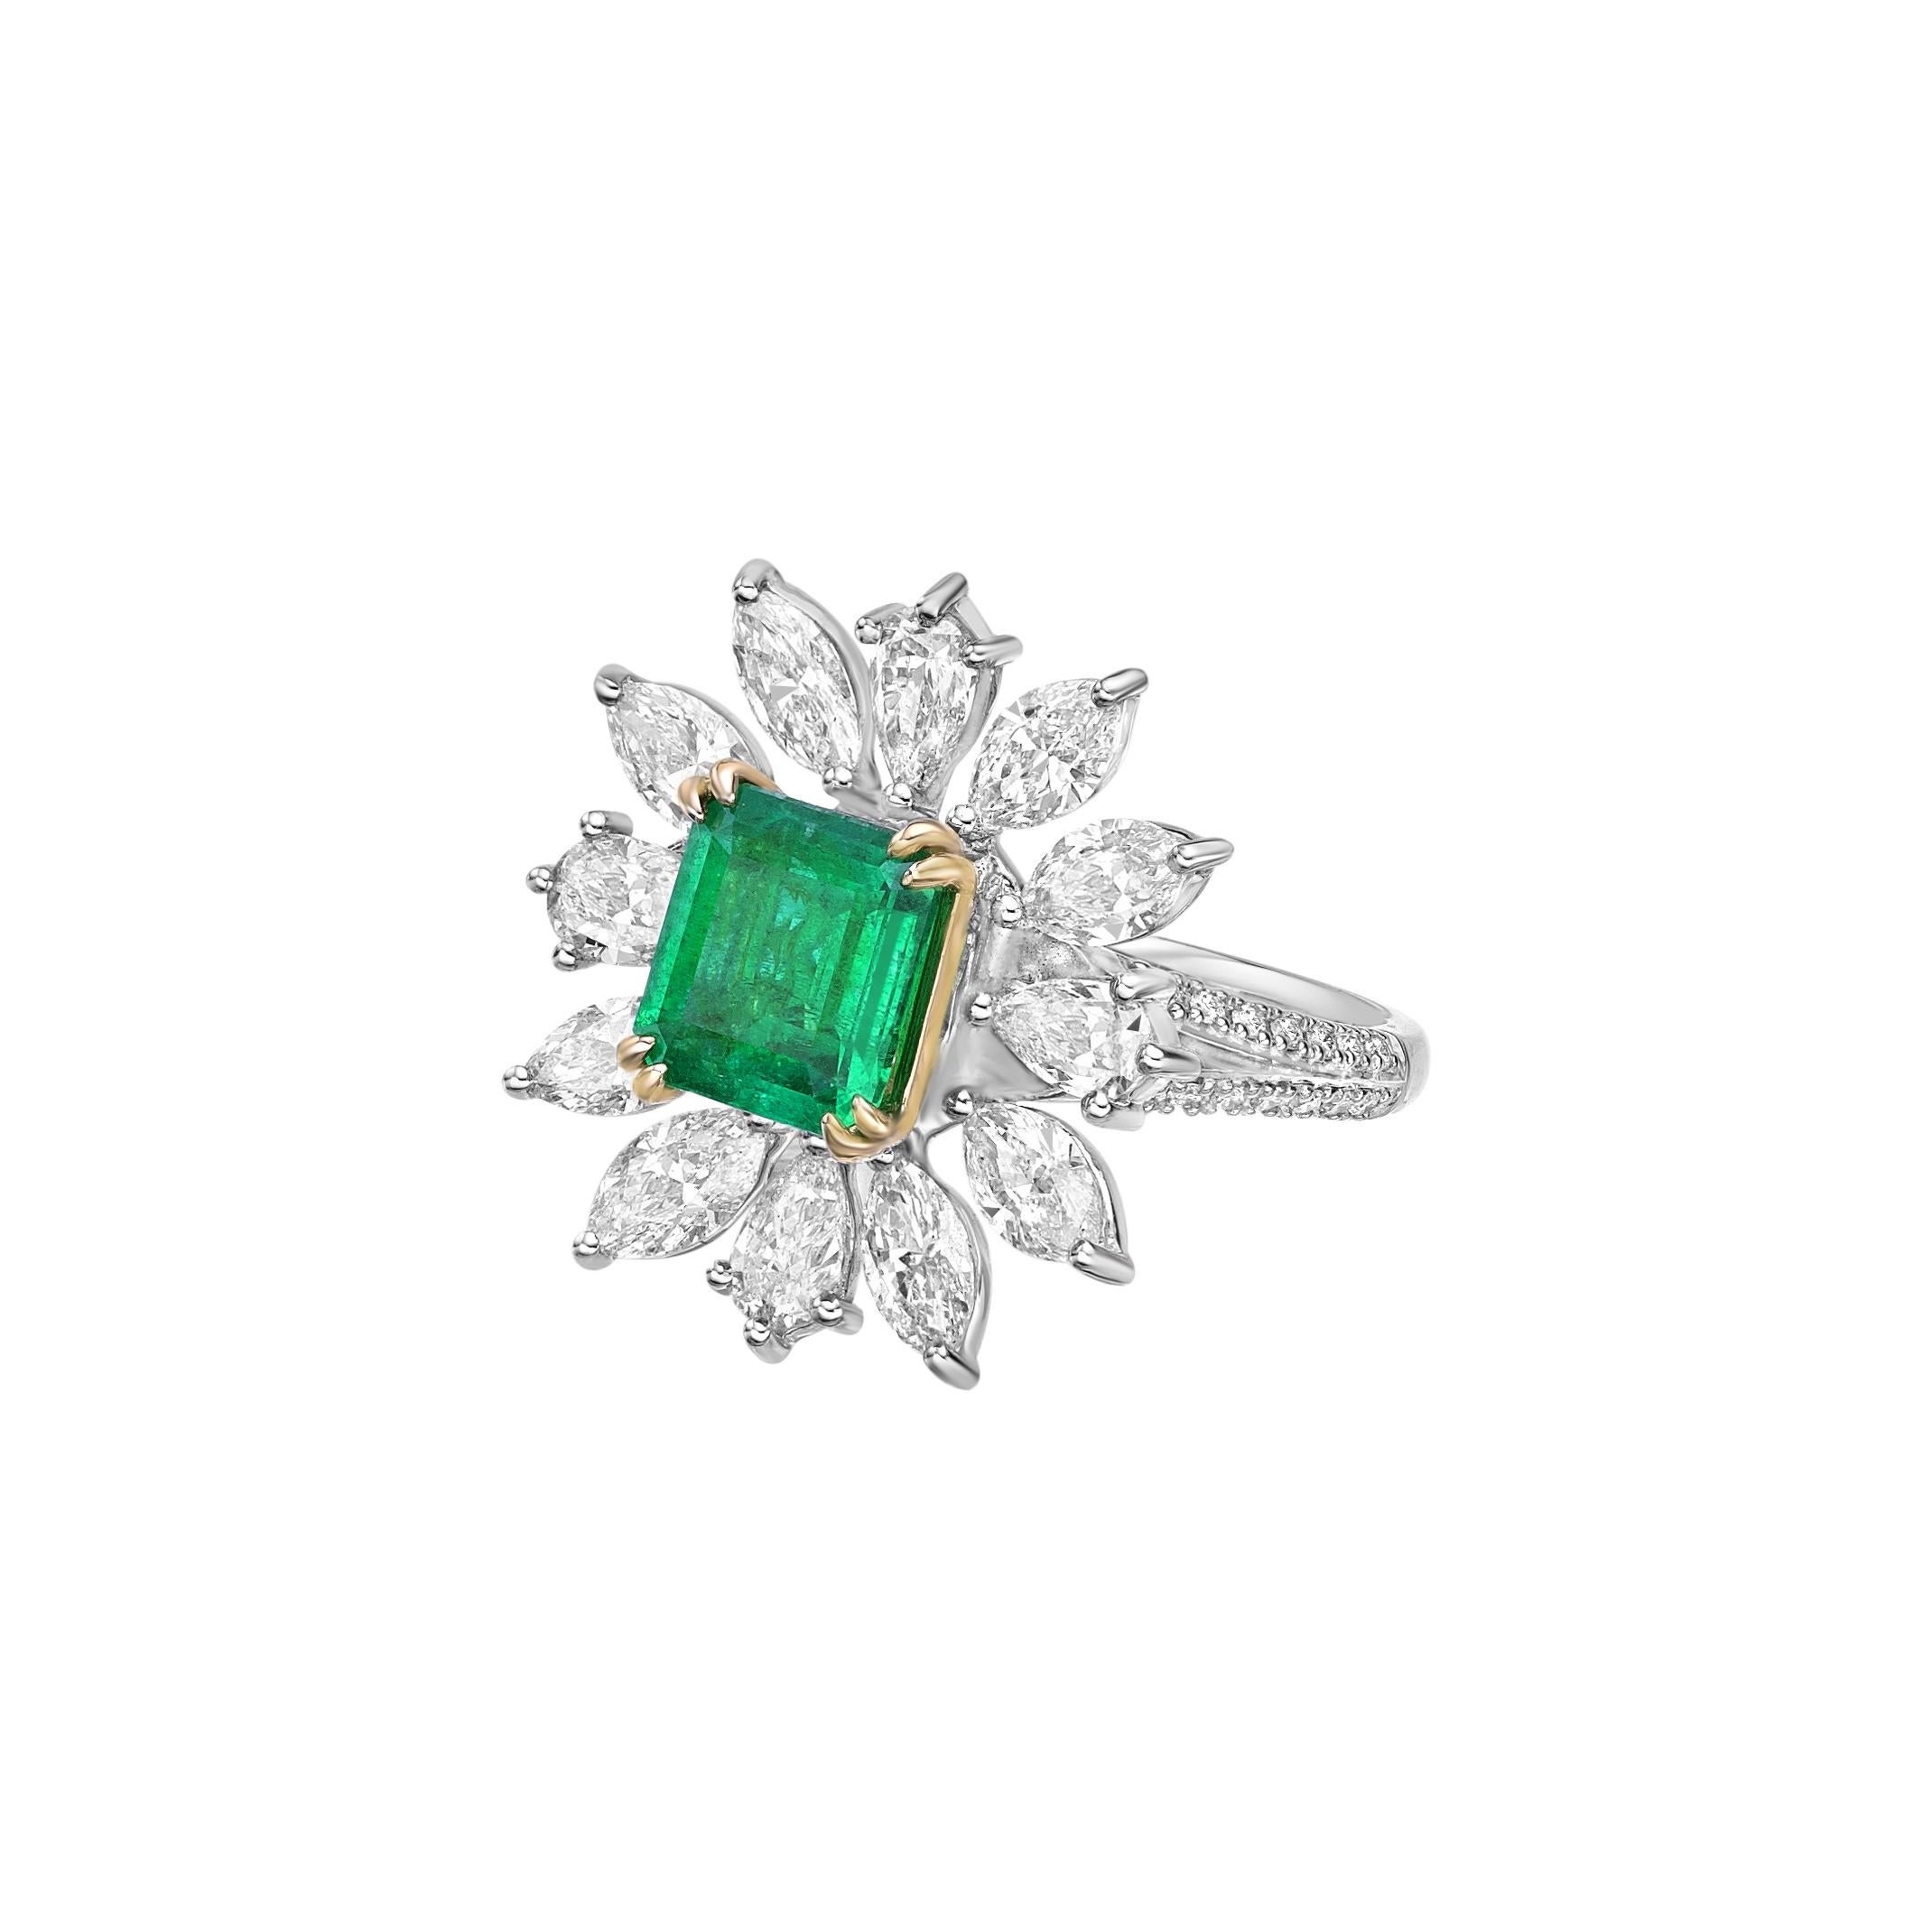 Octagon Cut 1.69 Carat Sunflower Emerald Bridal Ring in 18KWYG with White Diamond. For Sale